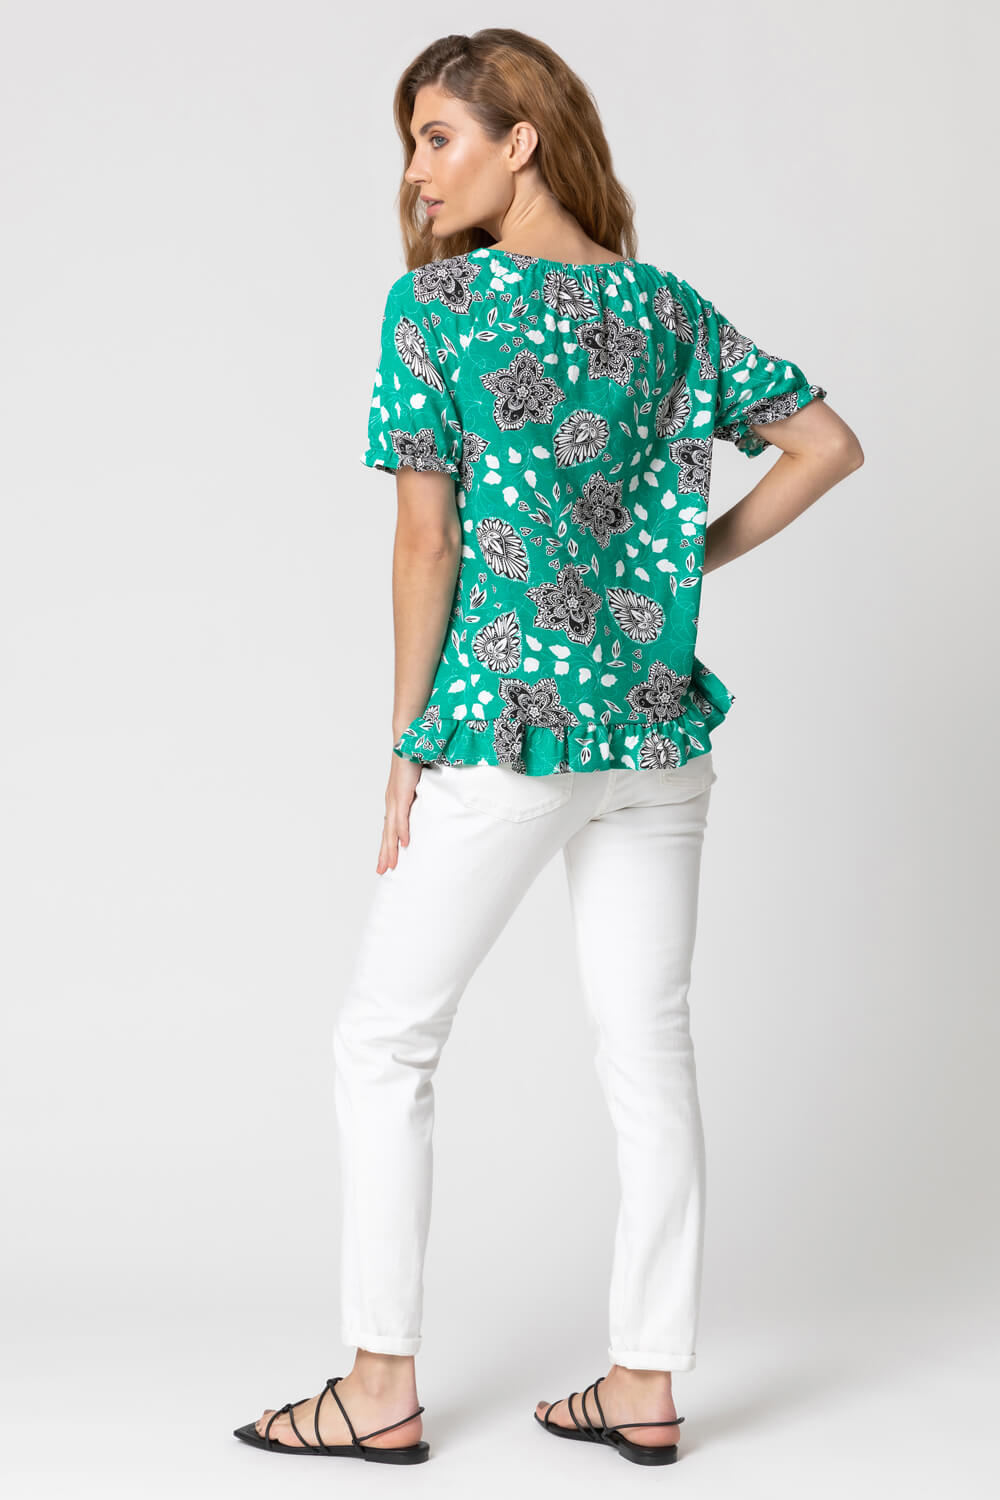 Green Floral Paisley Tassel Frill Top, Image 2 of 4